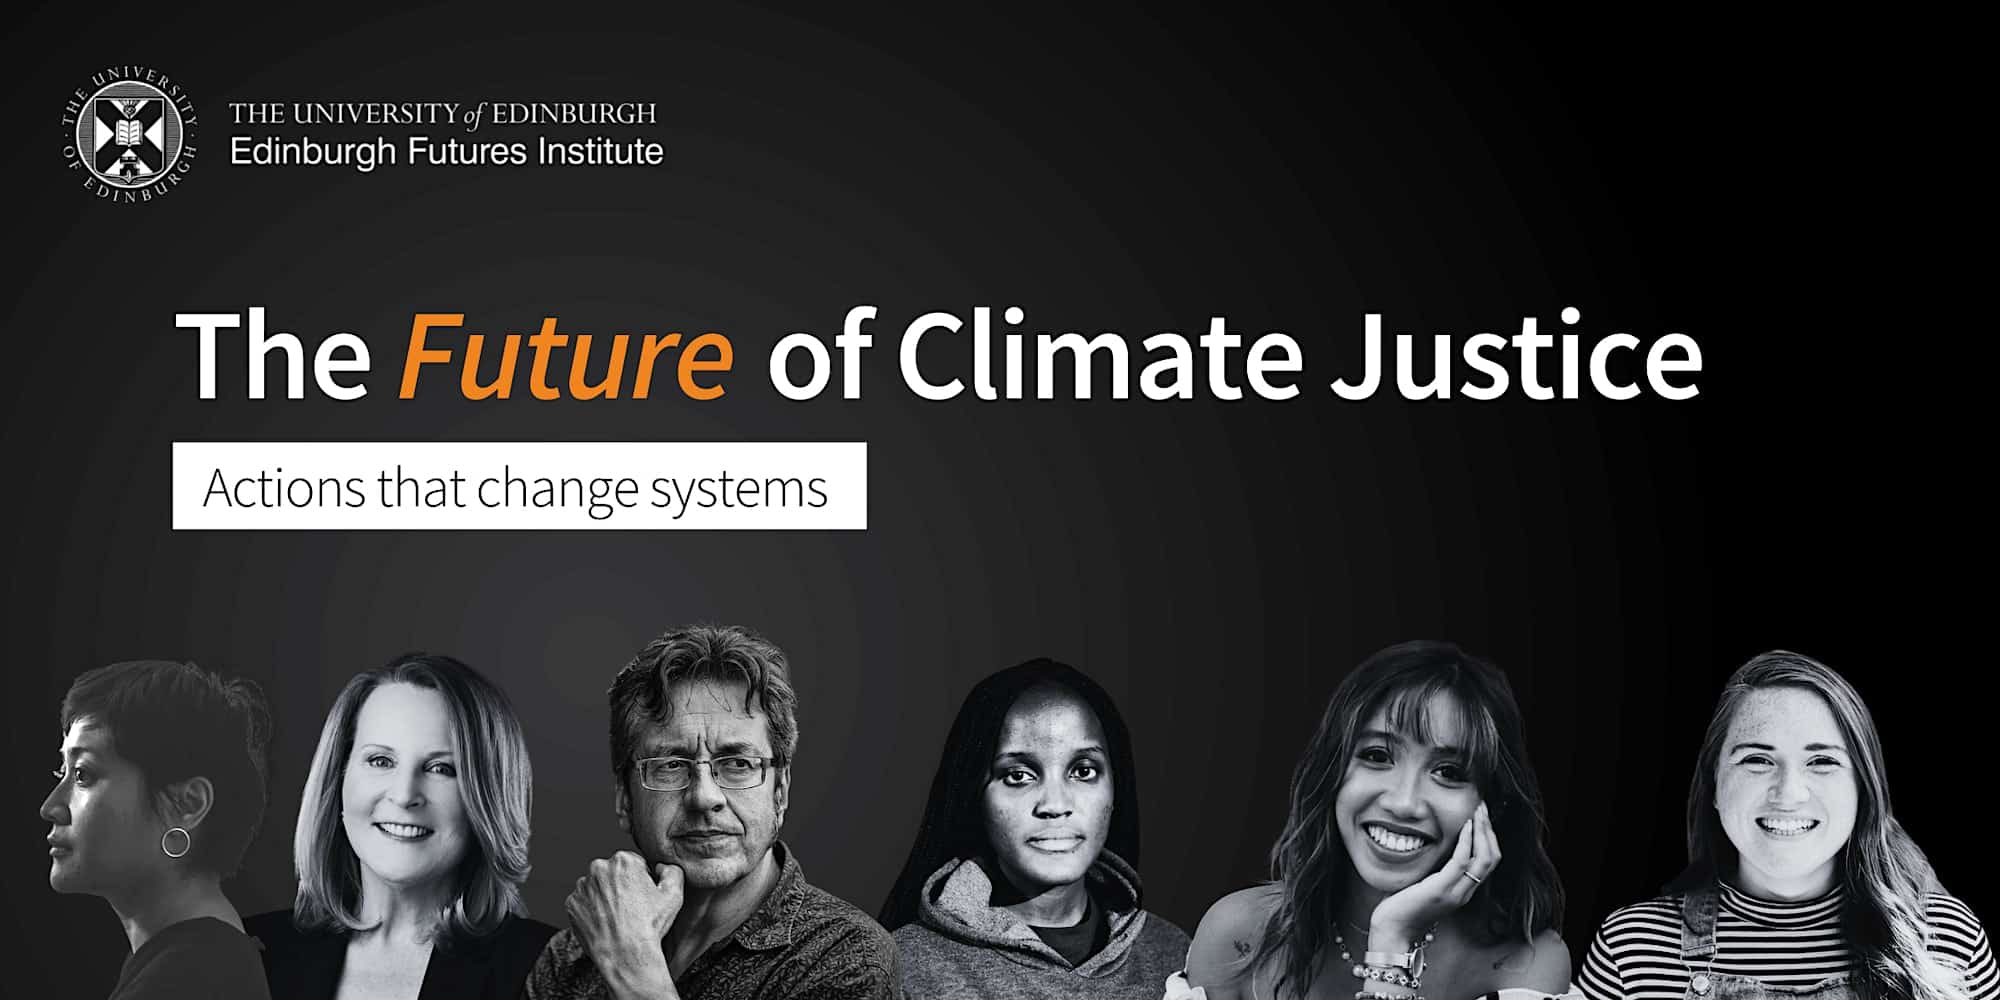 Image text reads: 'The Future of Climate Justice - The Future of Climate Justice: Actions that change systems'. With logo of Edinburgh Futures Institute, part of the Edinburgh Futures Conversations series. Includes headshots of panelists.